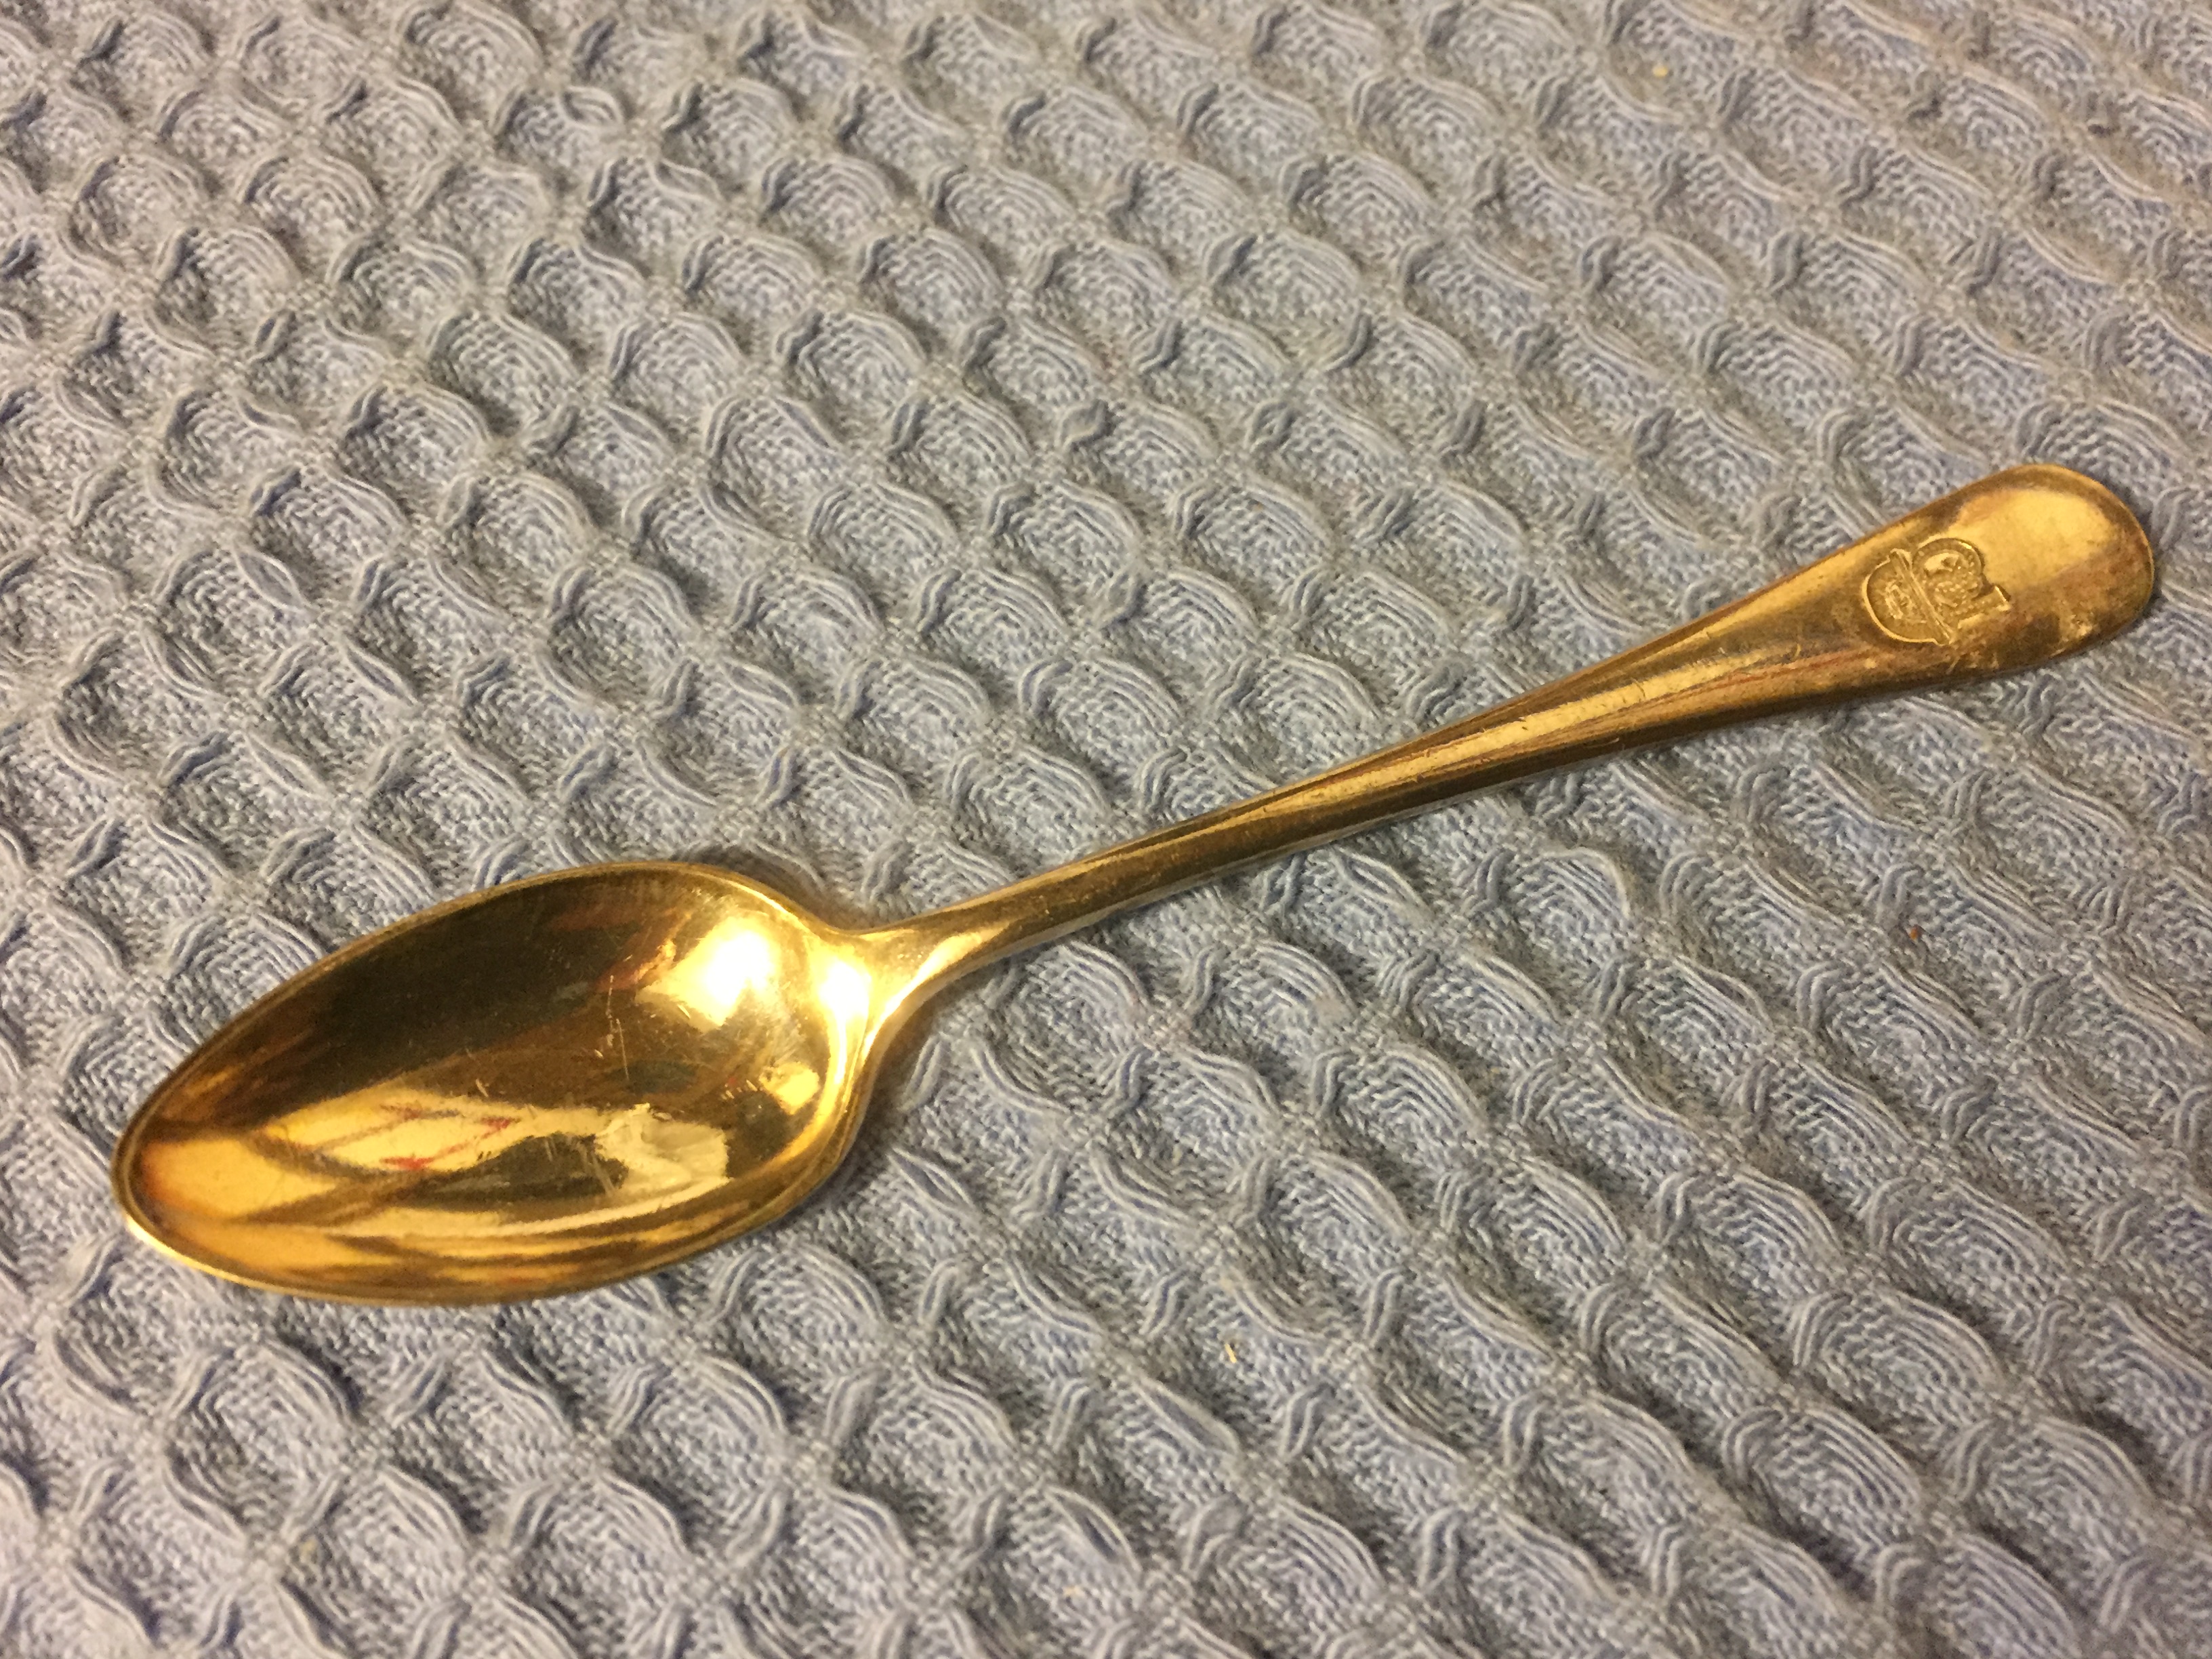 AS USED ON BOARD EGG SPOON FROM THE P&O LINE